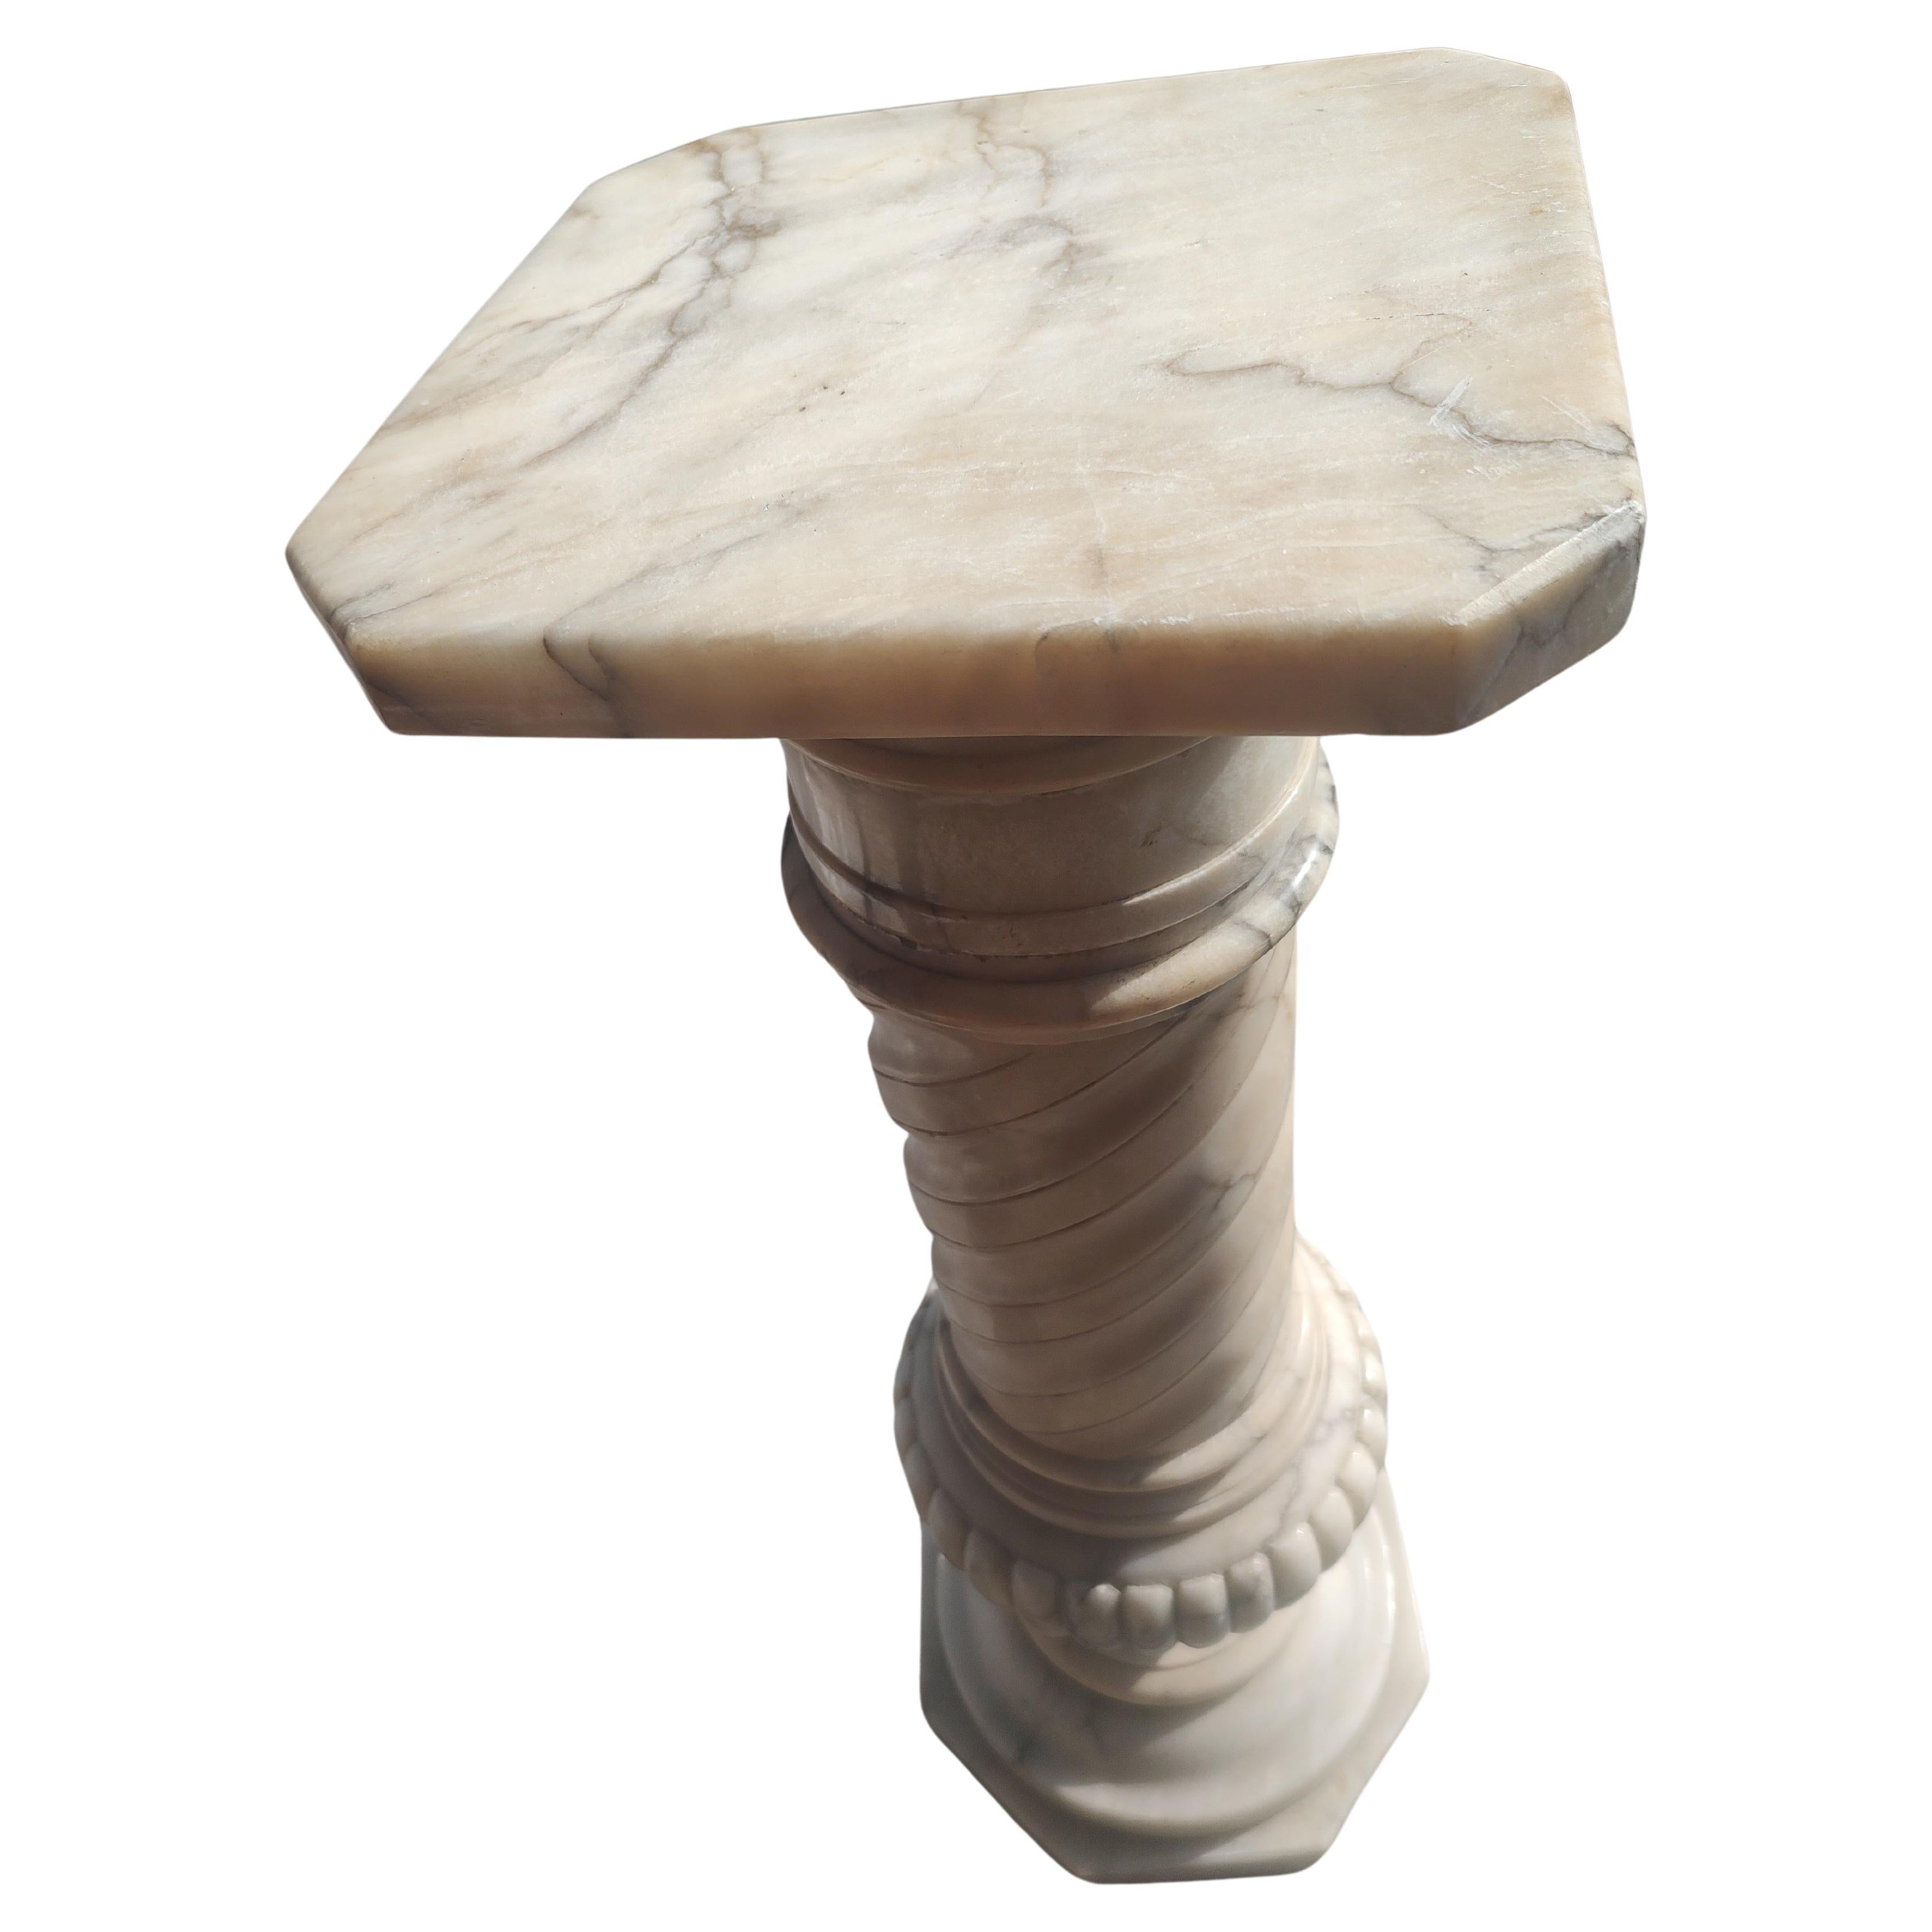 Early Italian Carved Carrara Marble Pedestal C1920 For Sale 1